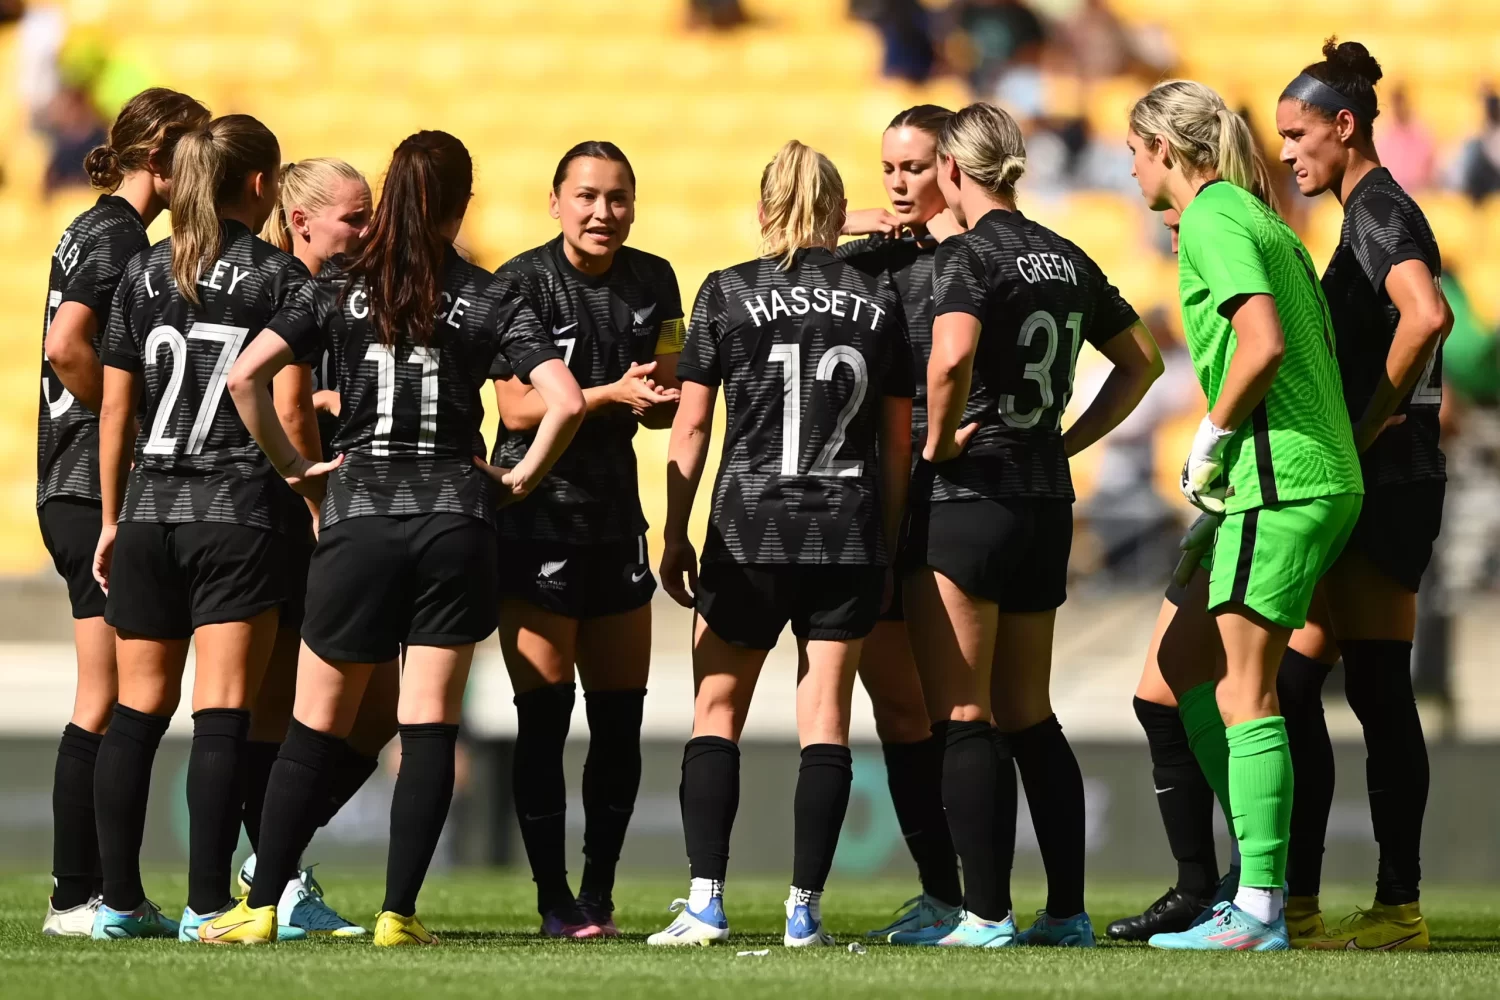 New Zealand Women vs Norway Women: Match Preview, Live stream, TV channel, kick-off time